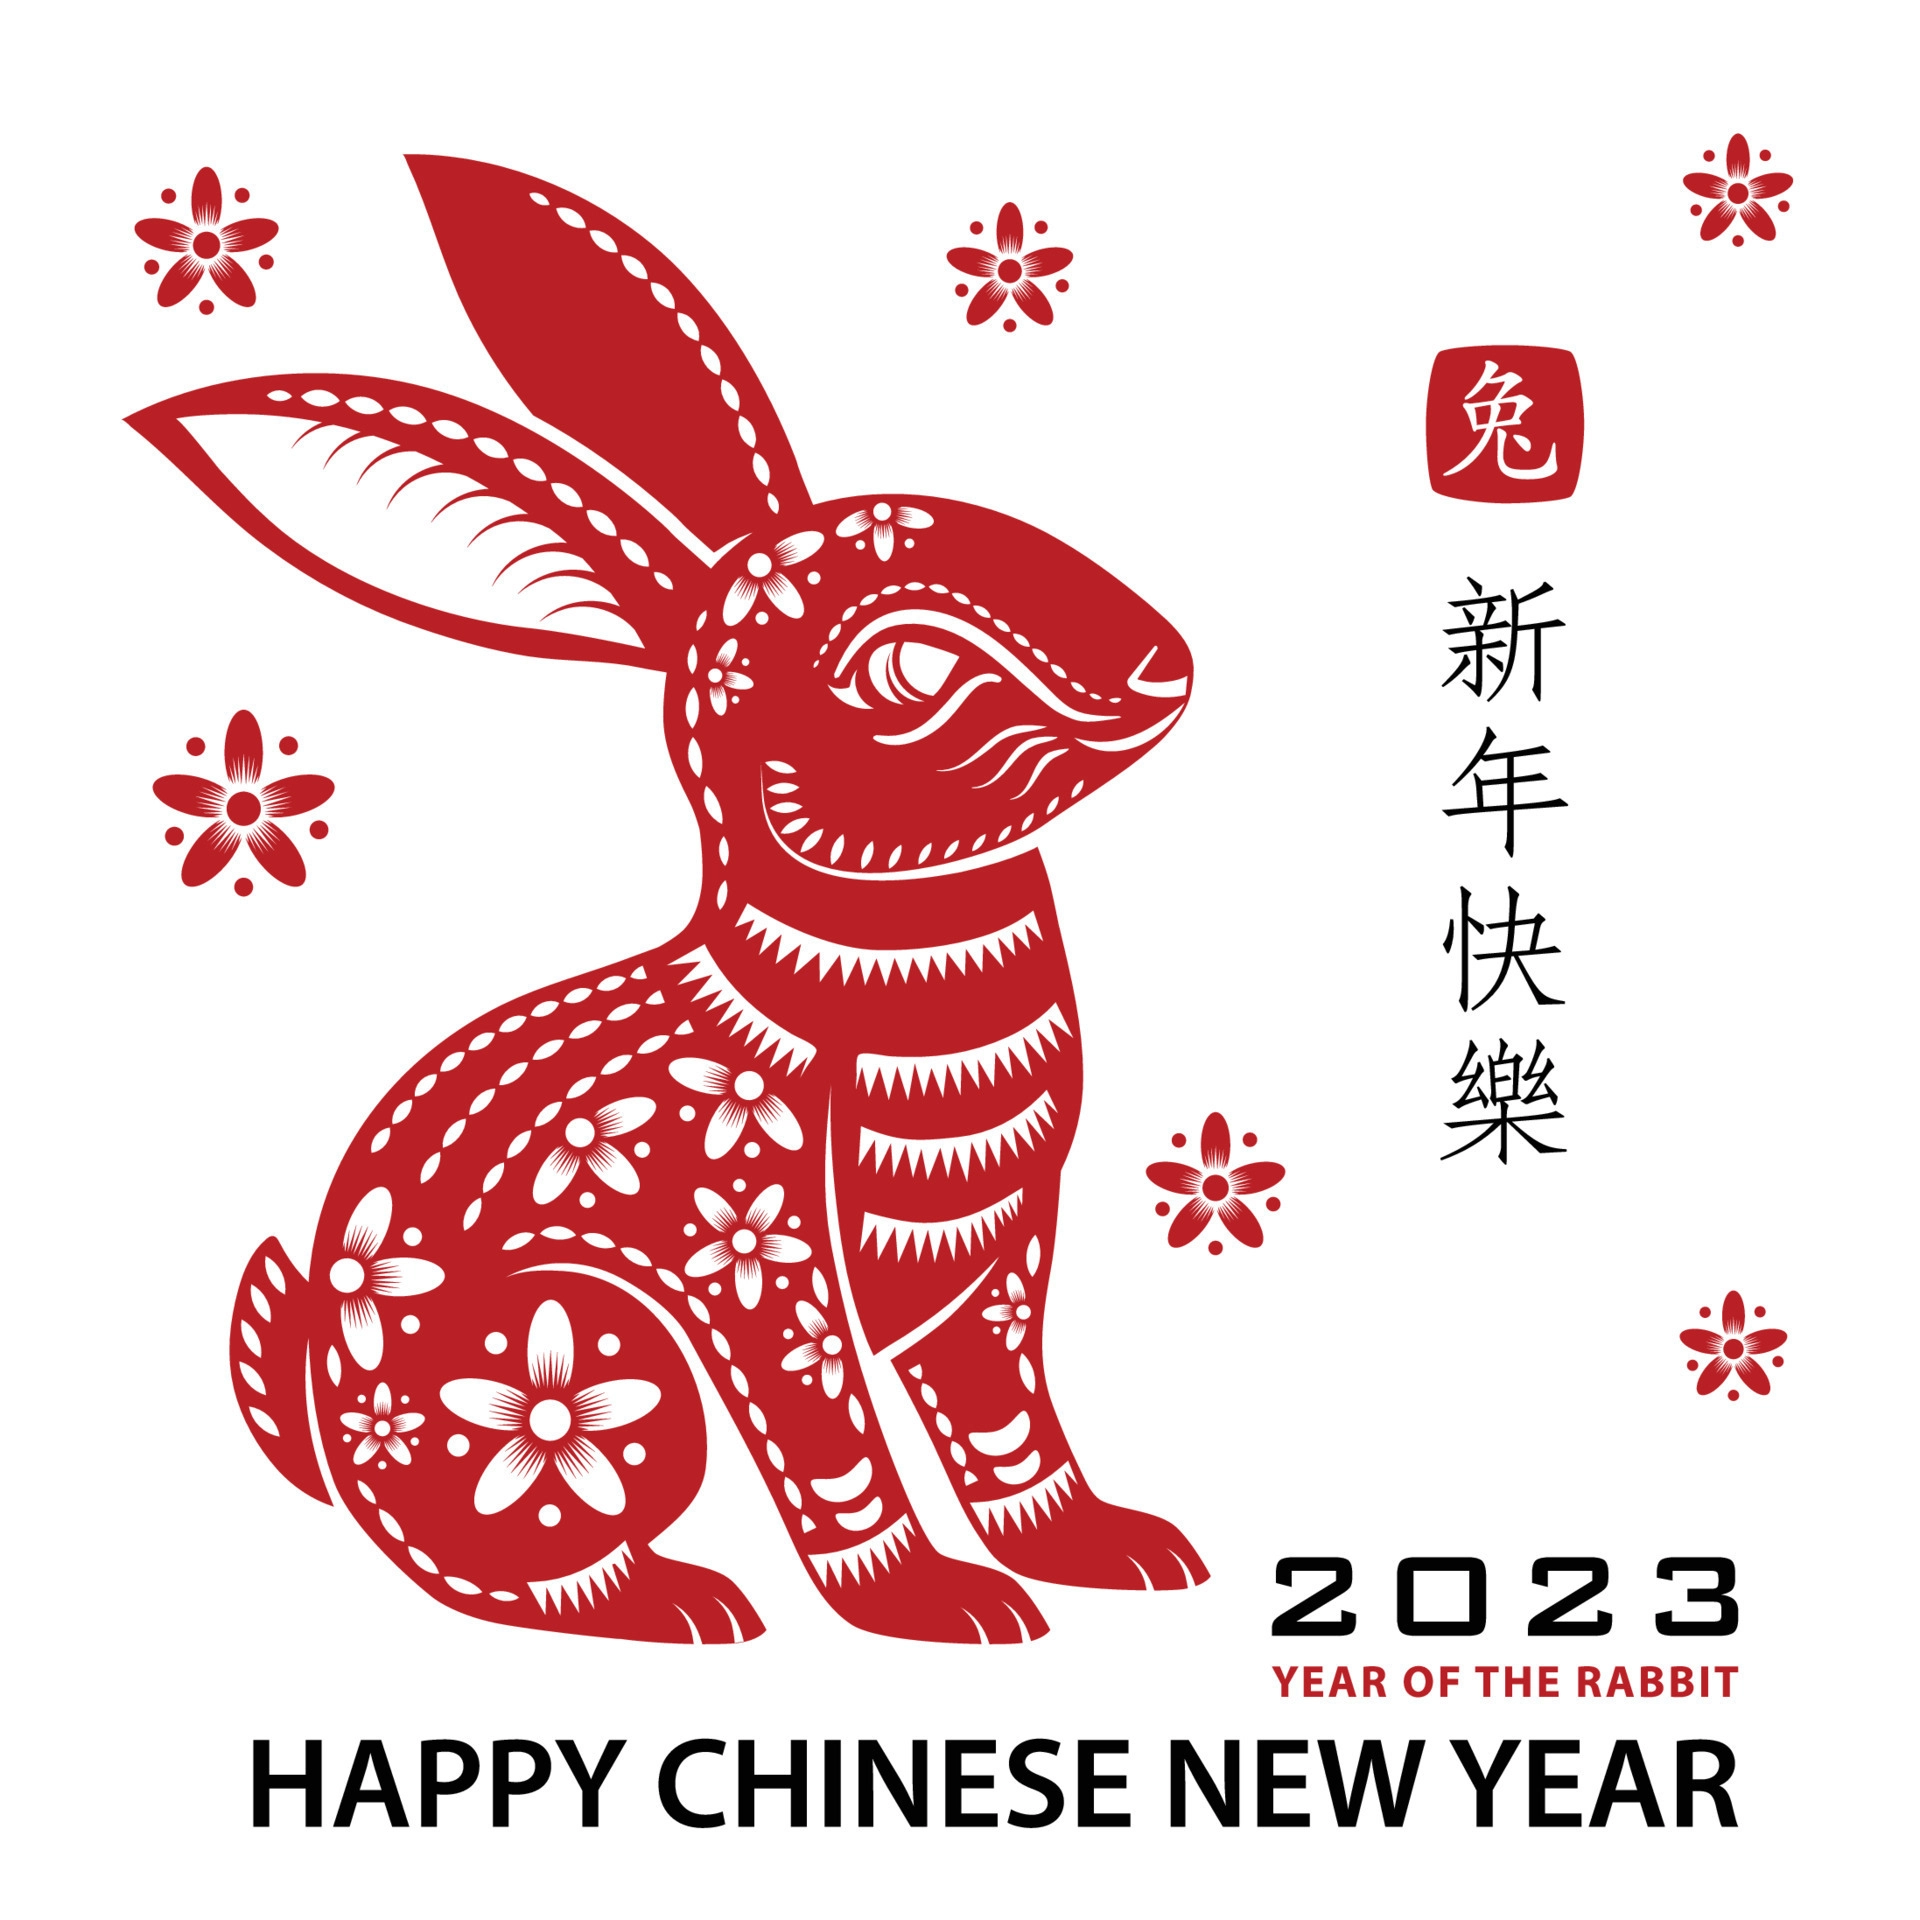 Chinese New Year Greetings and Wishes 2023